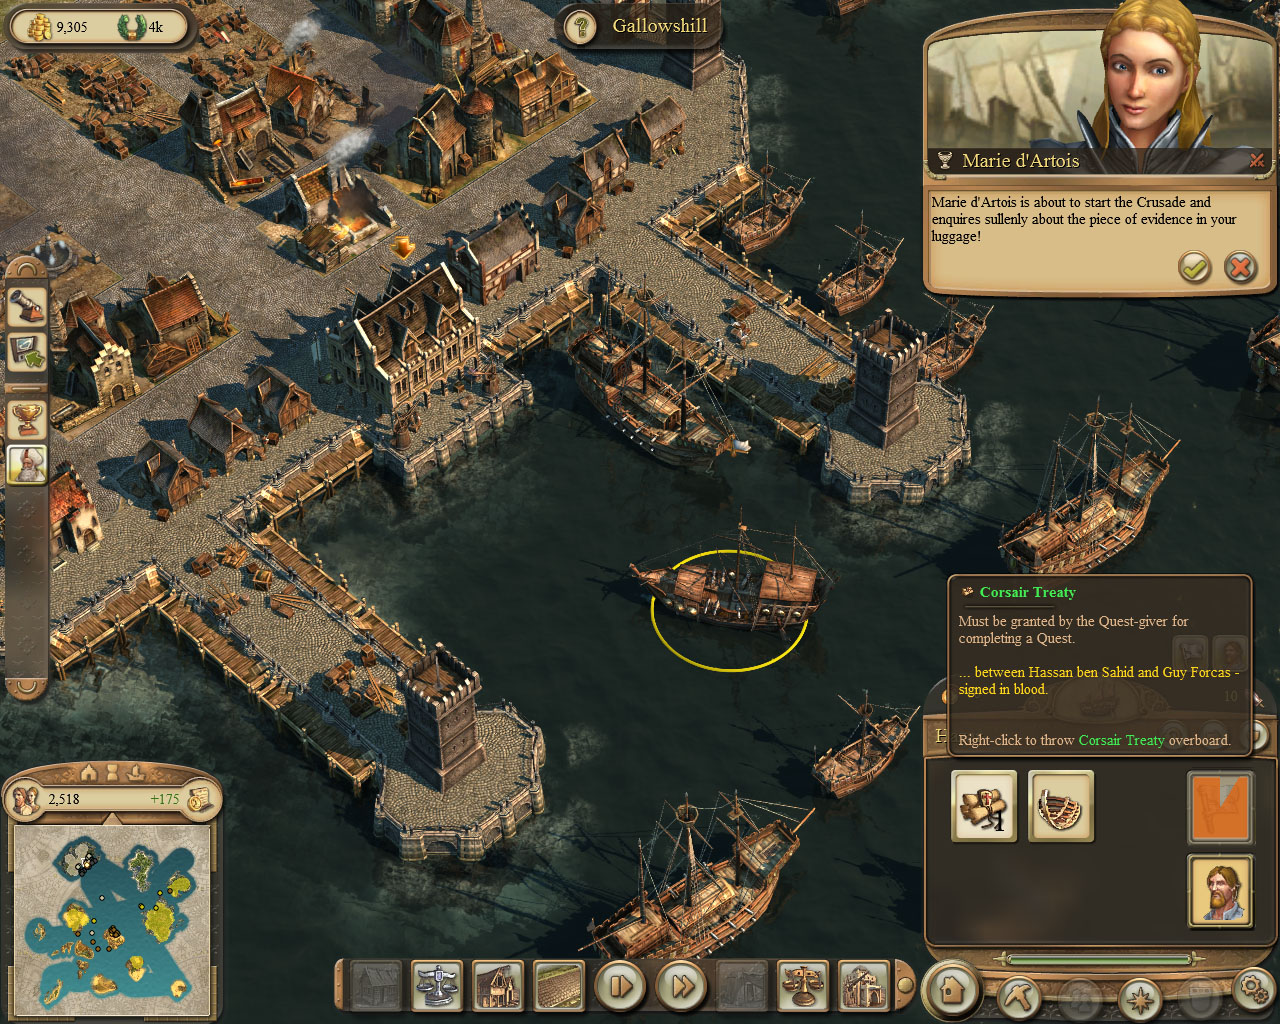 anno 1404 collect tools from ship